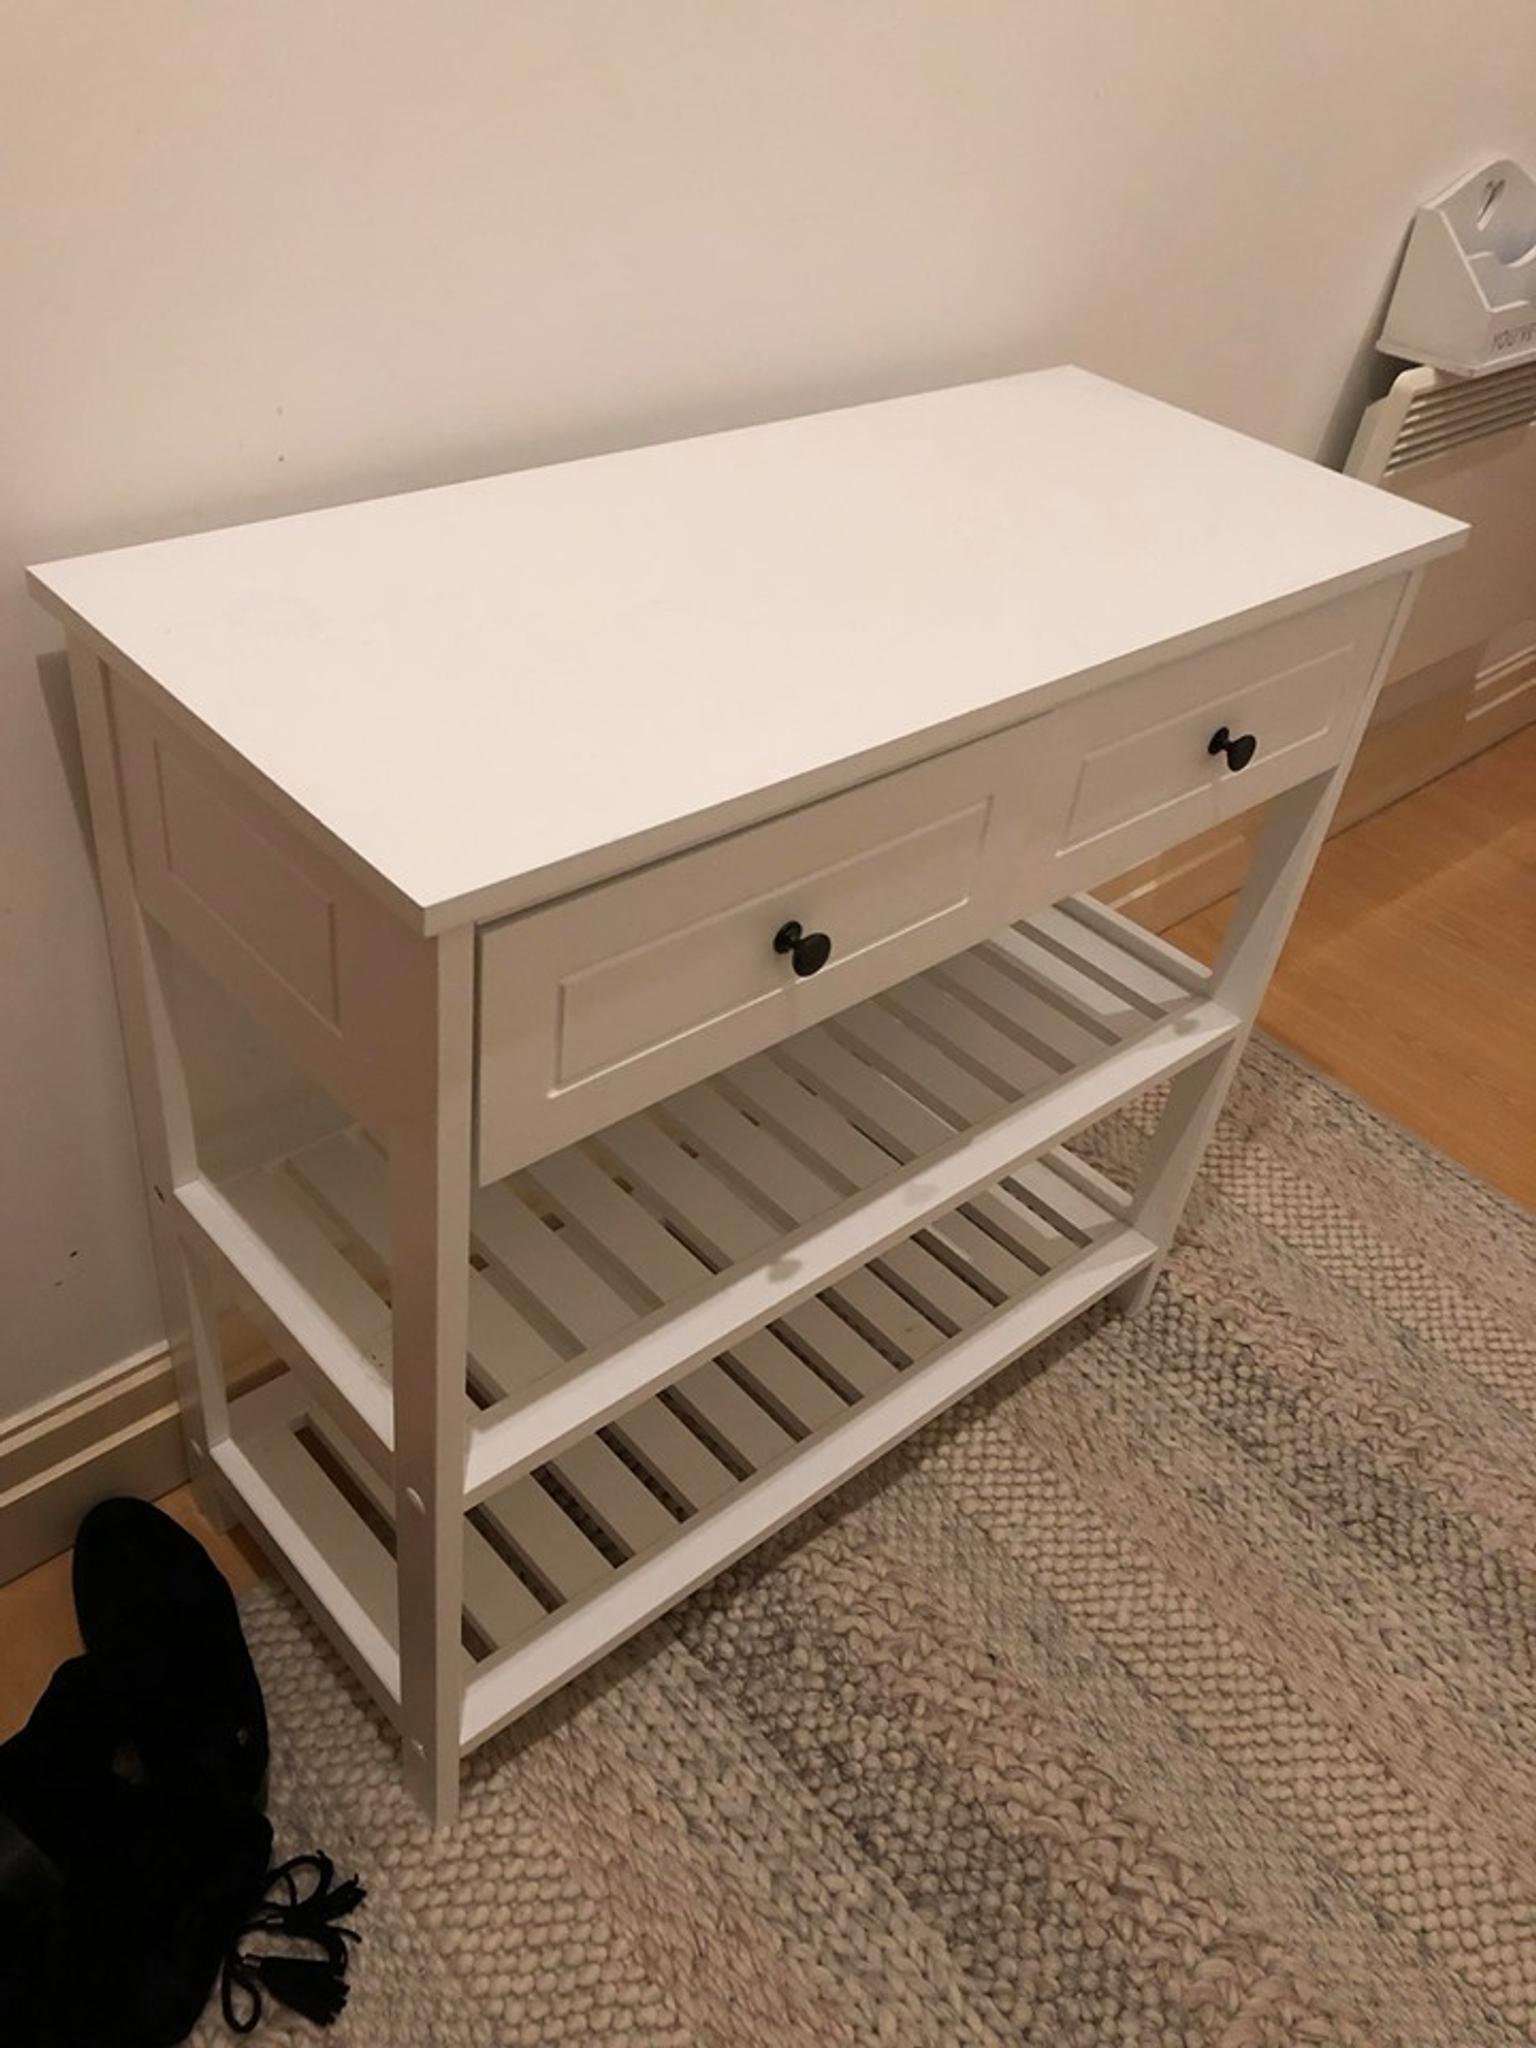 Multi Purpose Console Table With Shoe Rack In N1 London For 20 00